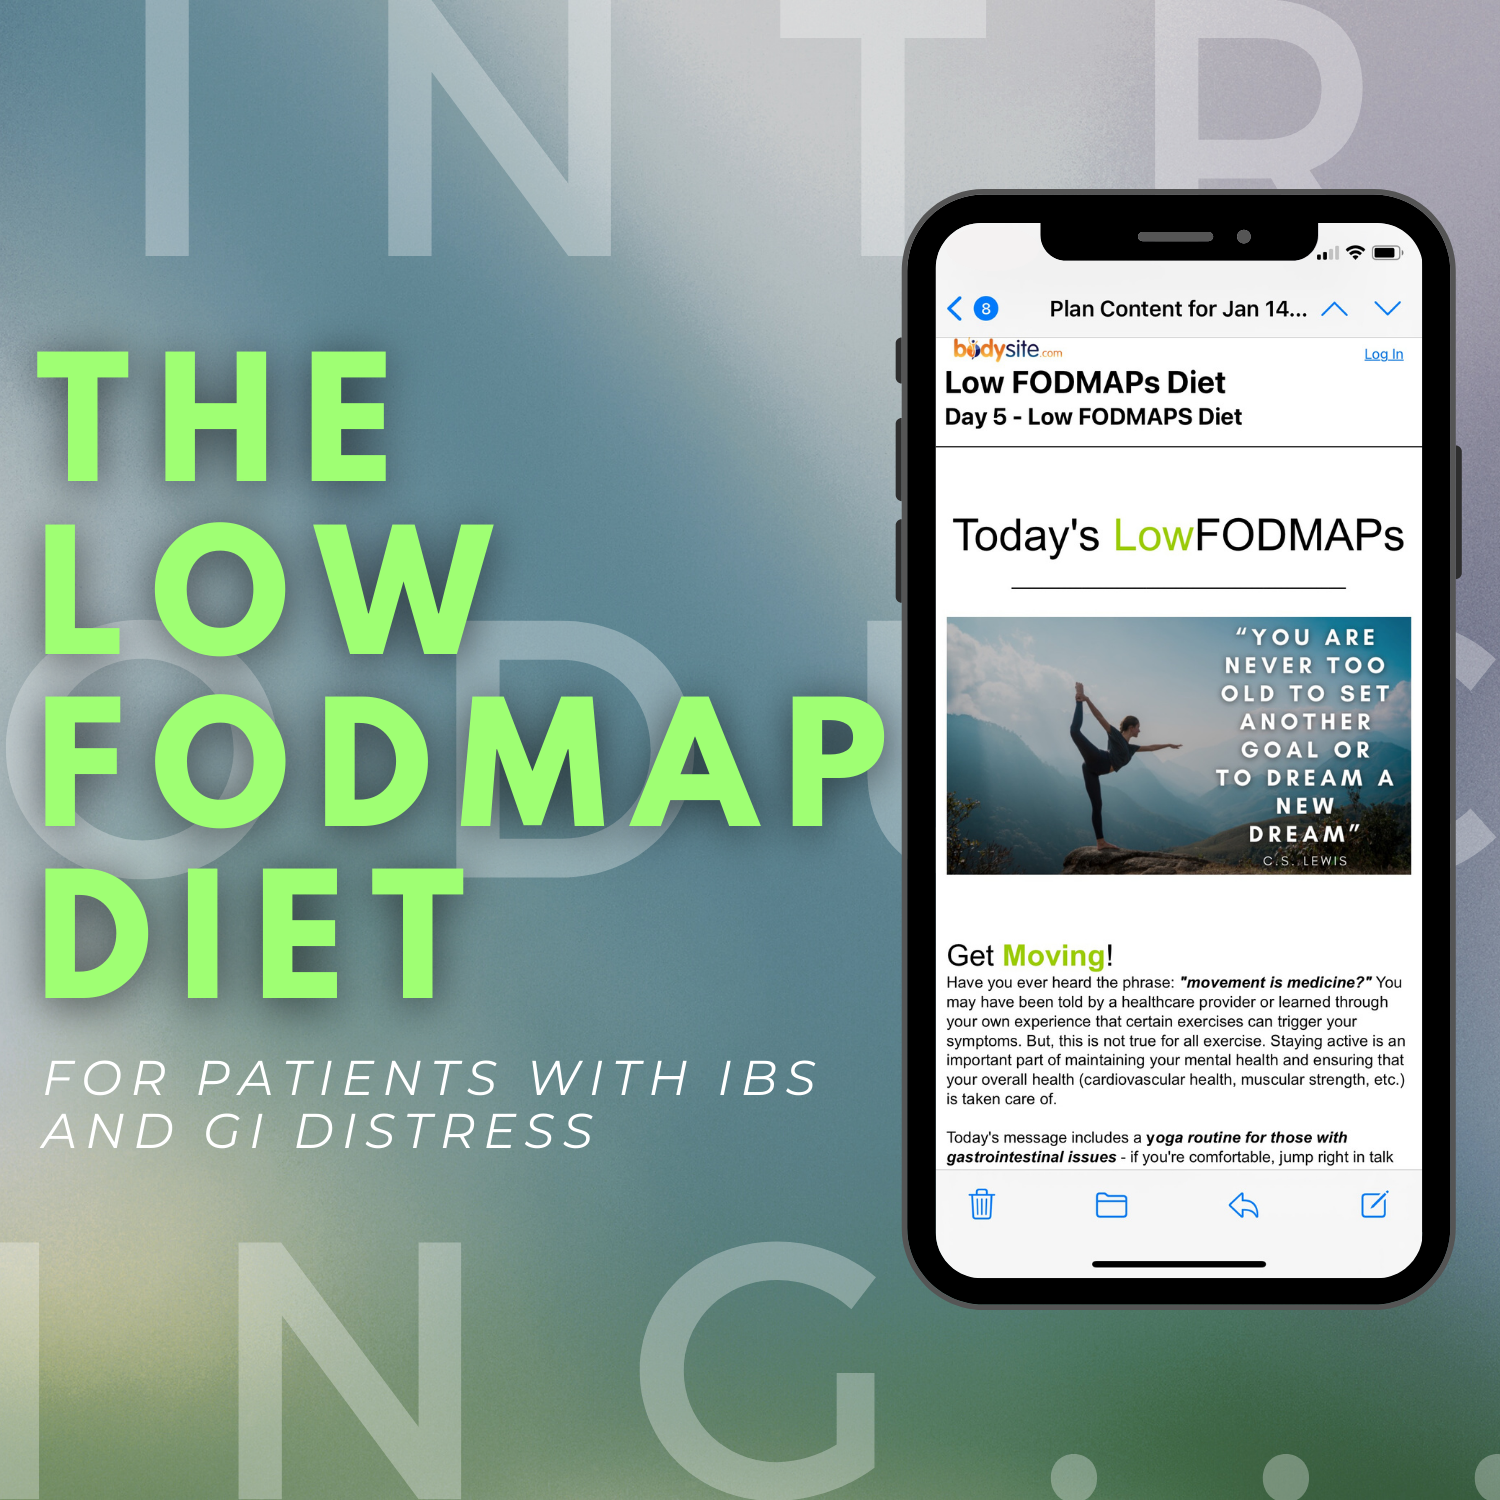 treating-patients-with-ibs-remotely-remote-patient-care-monitoring-low-fodmaps